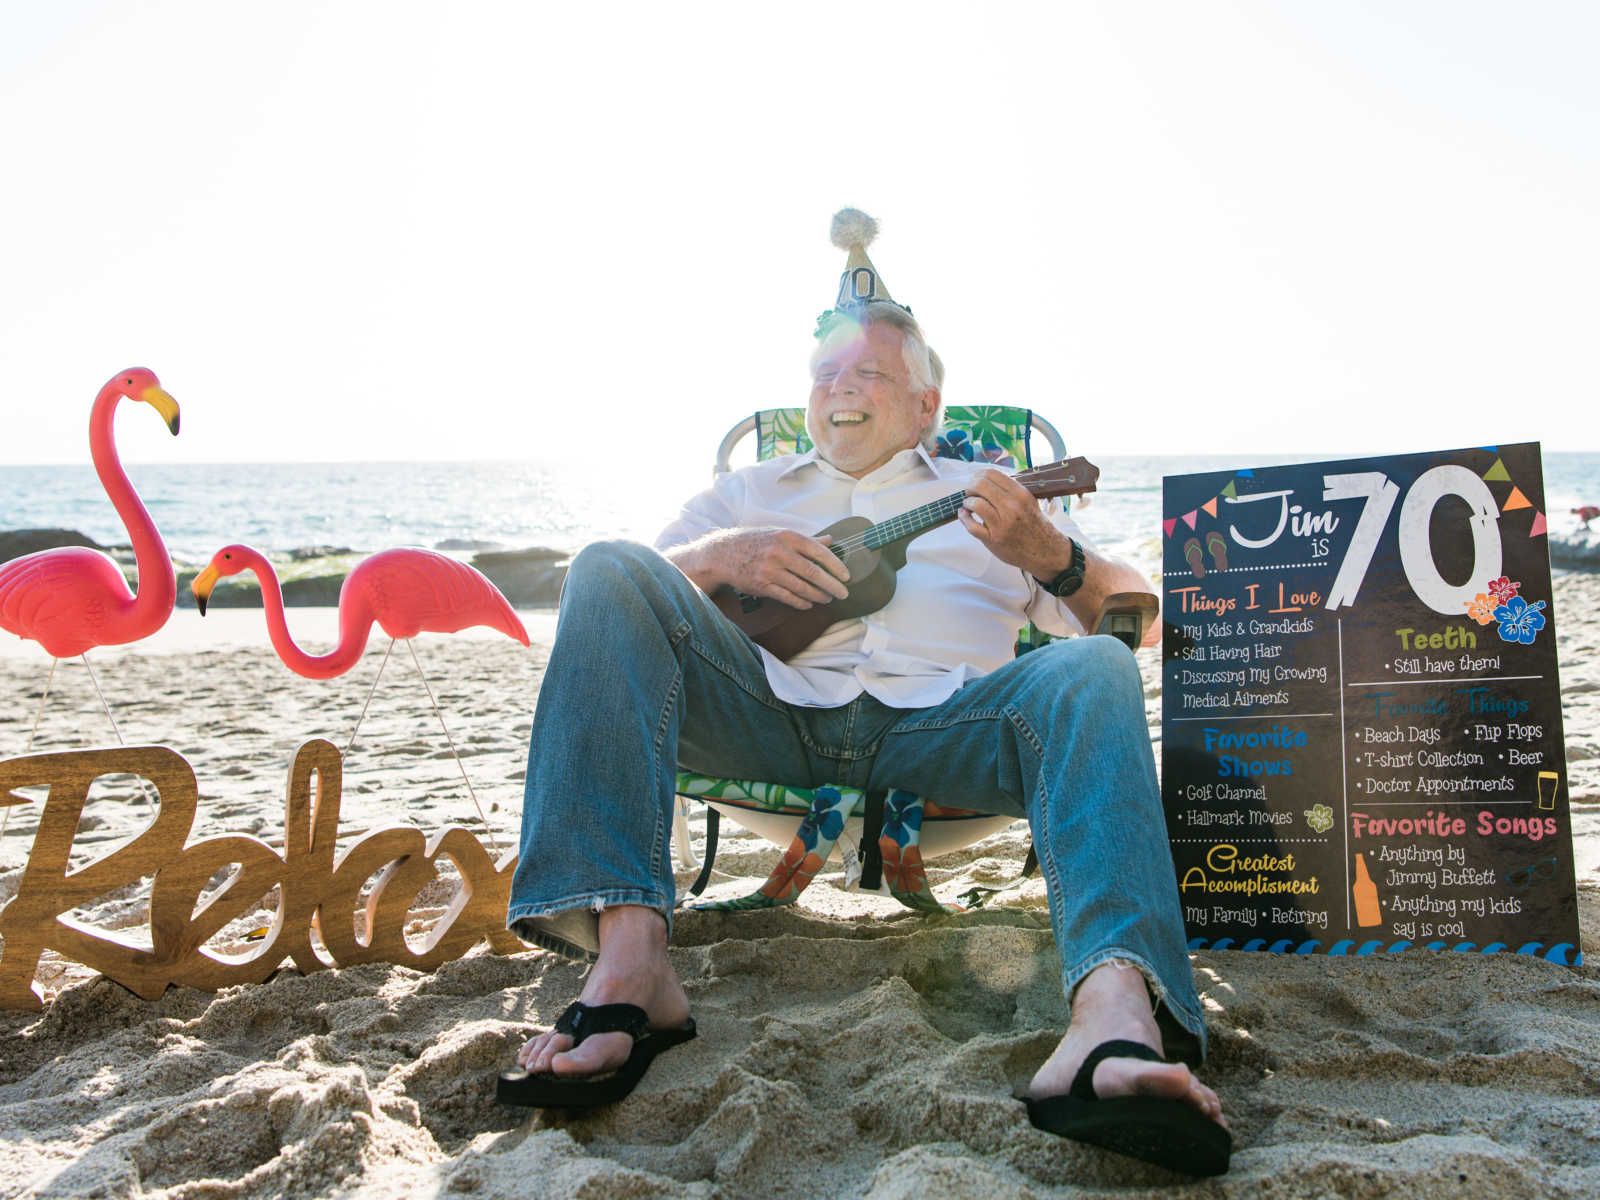 man with party hat sitting in beach chair smiling while playing the ukelele in the sand